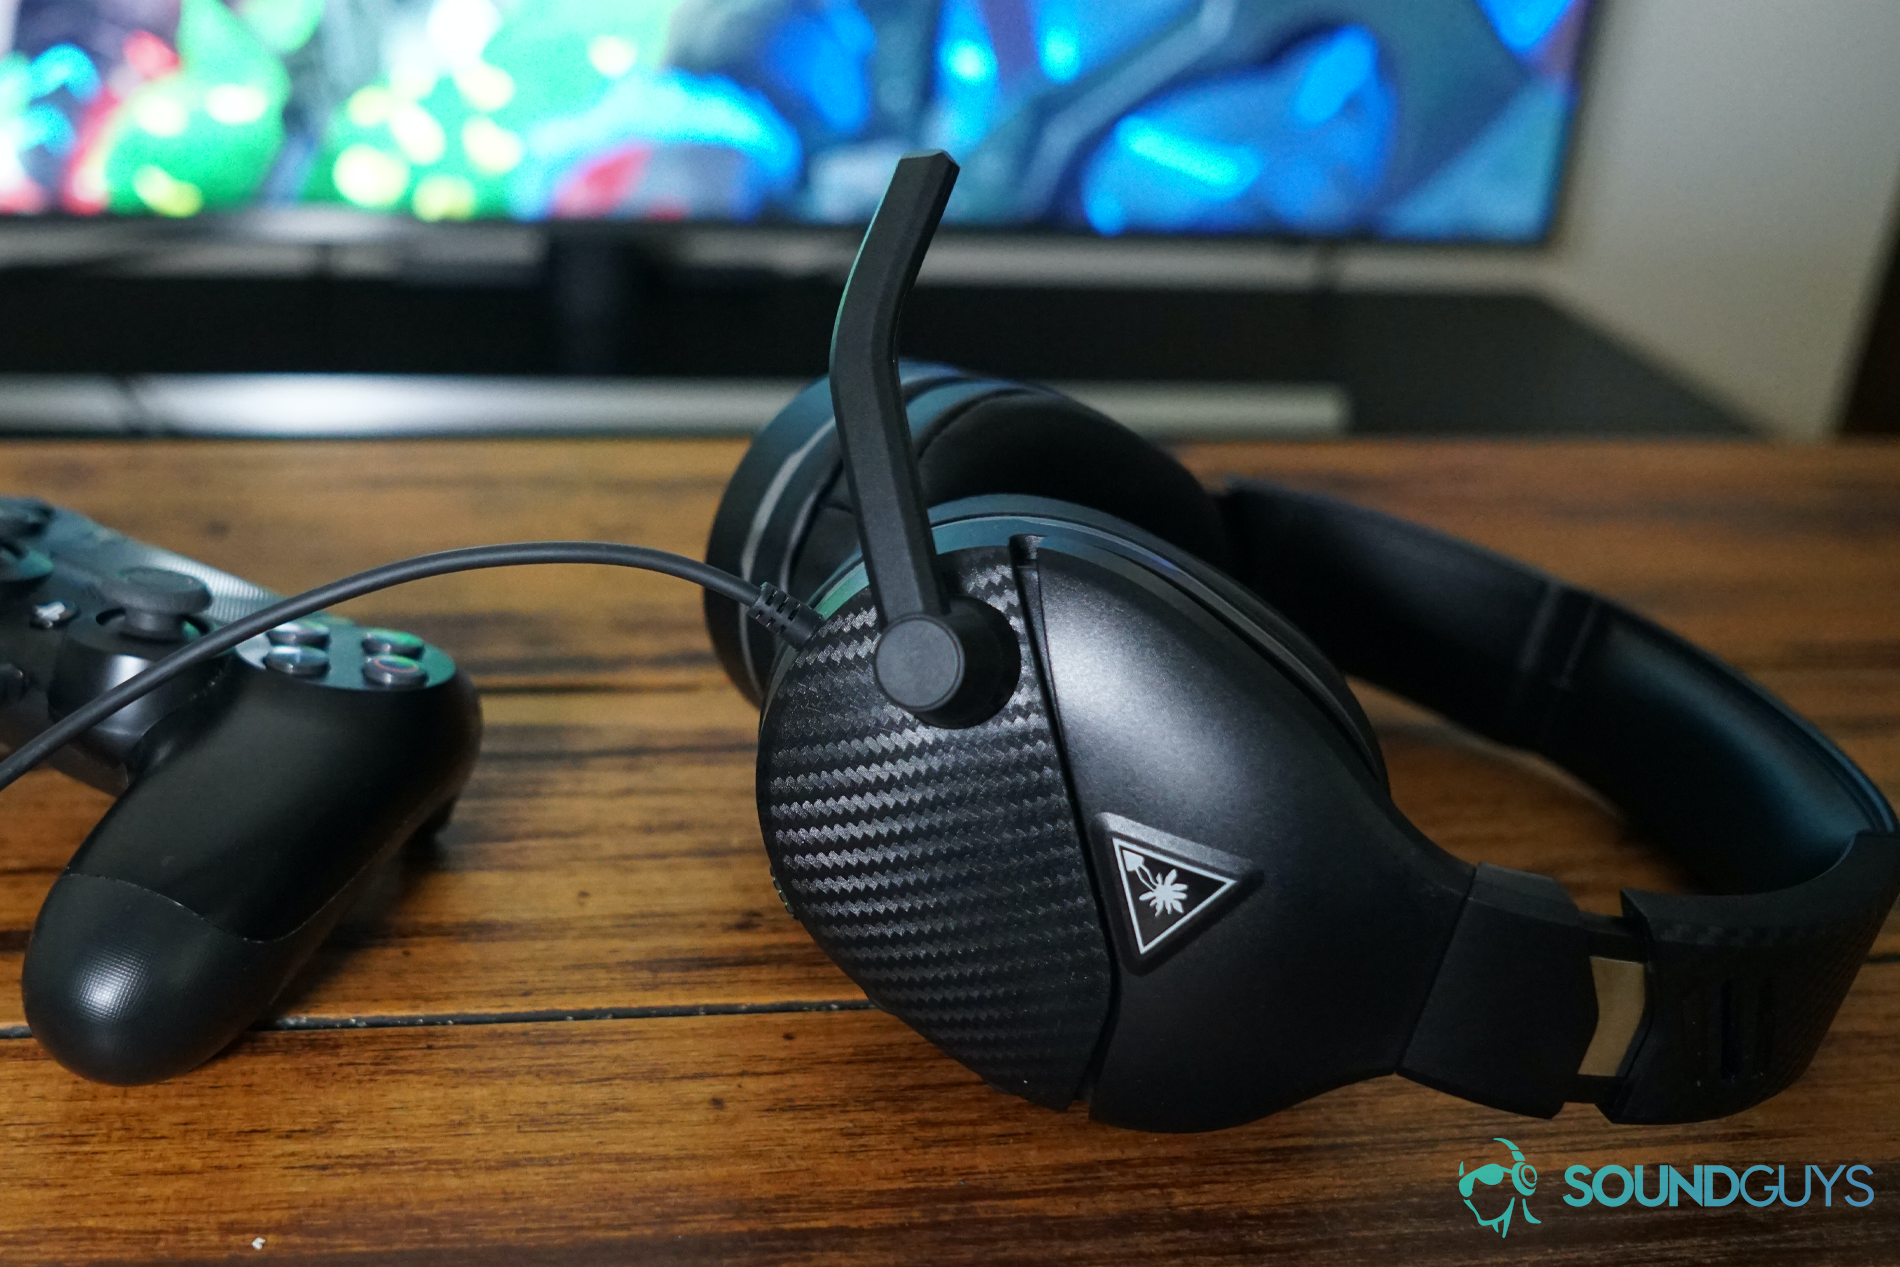 The Turtle Beach Recon 200 gaming headset sits on a table next to a Playstation DualShock 4 controller in front of a television with a Playstation 4 running Dauntless.